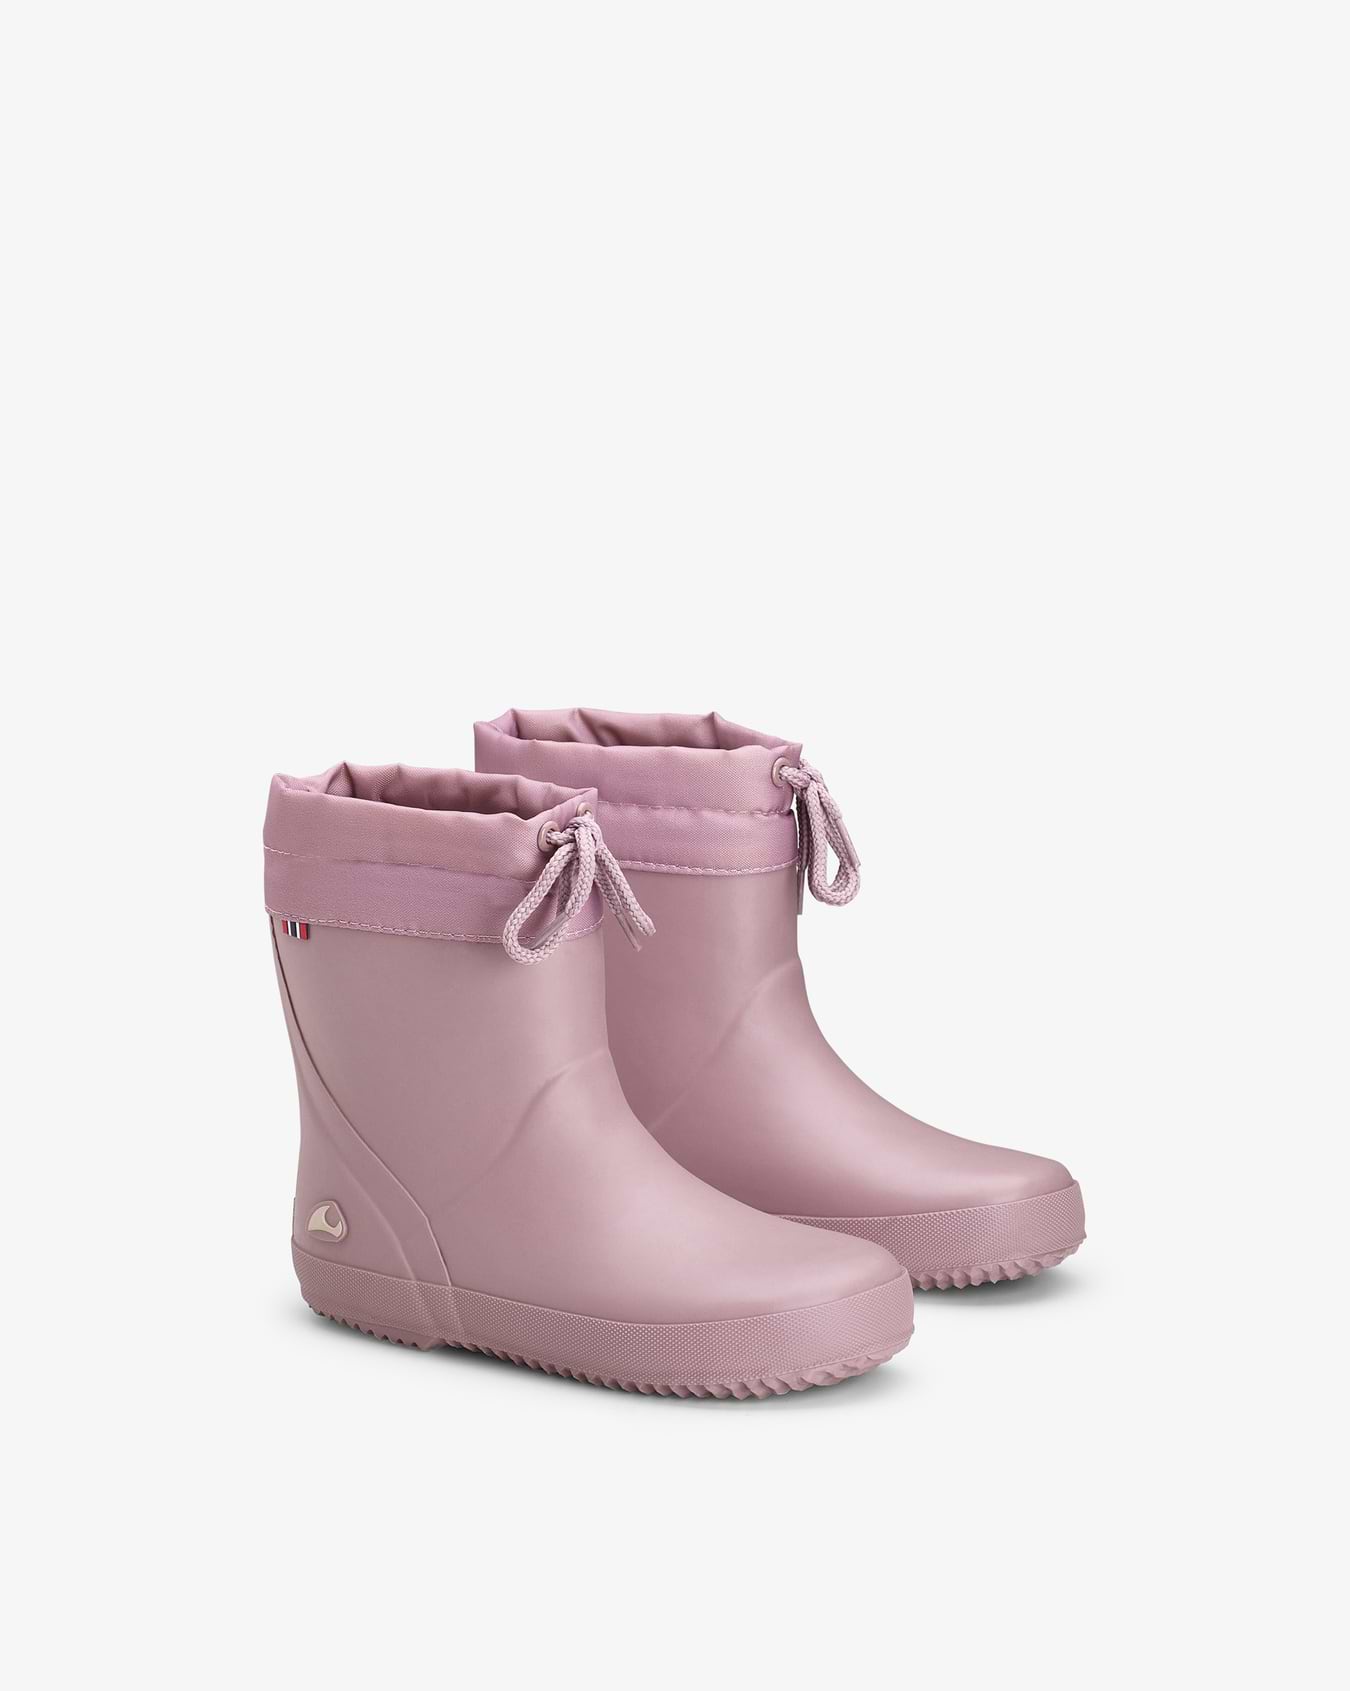 Alv Indie Warm Dusty Pink/Light Pink Rubber Boot